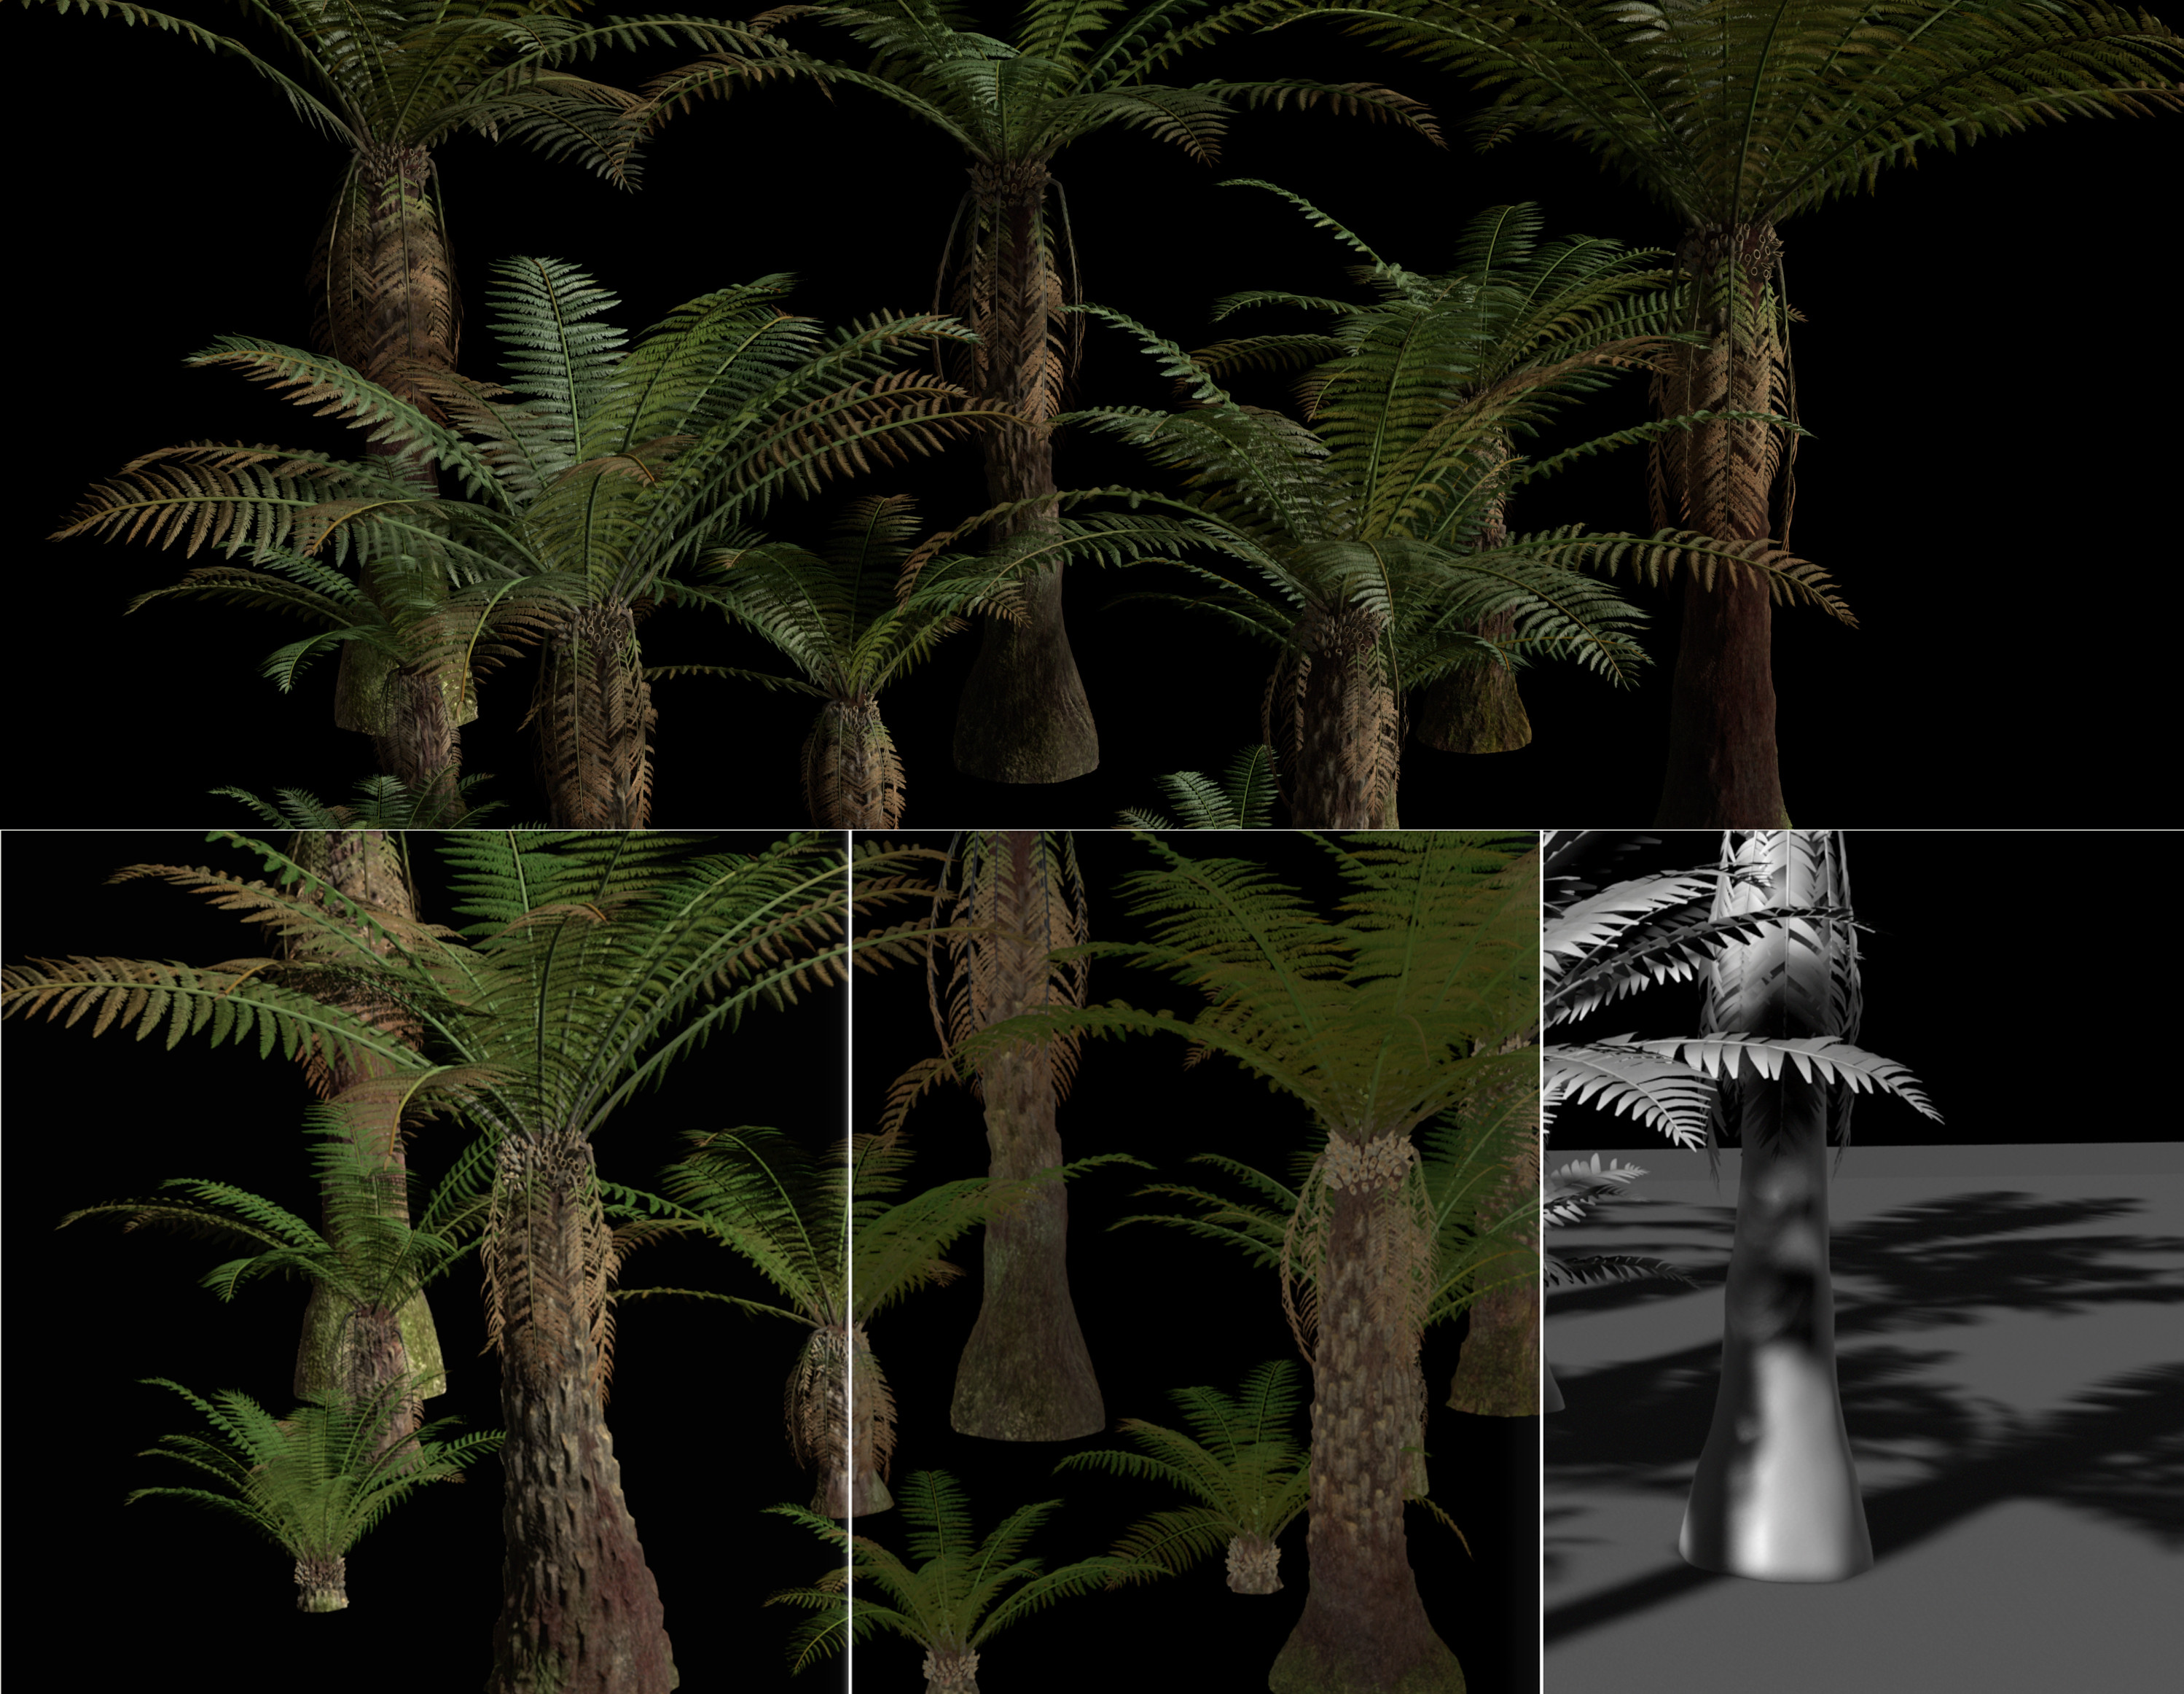 Texturing &amp; Lookdev of some Fern Trees